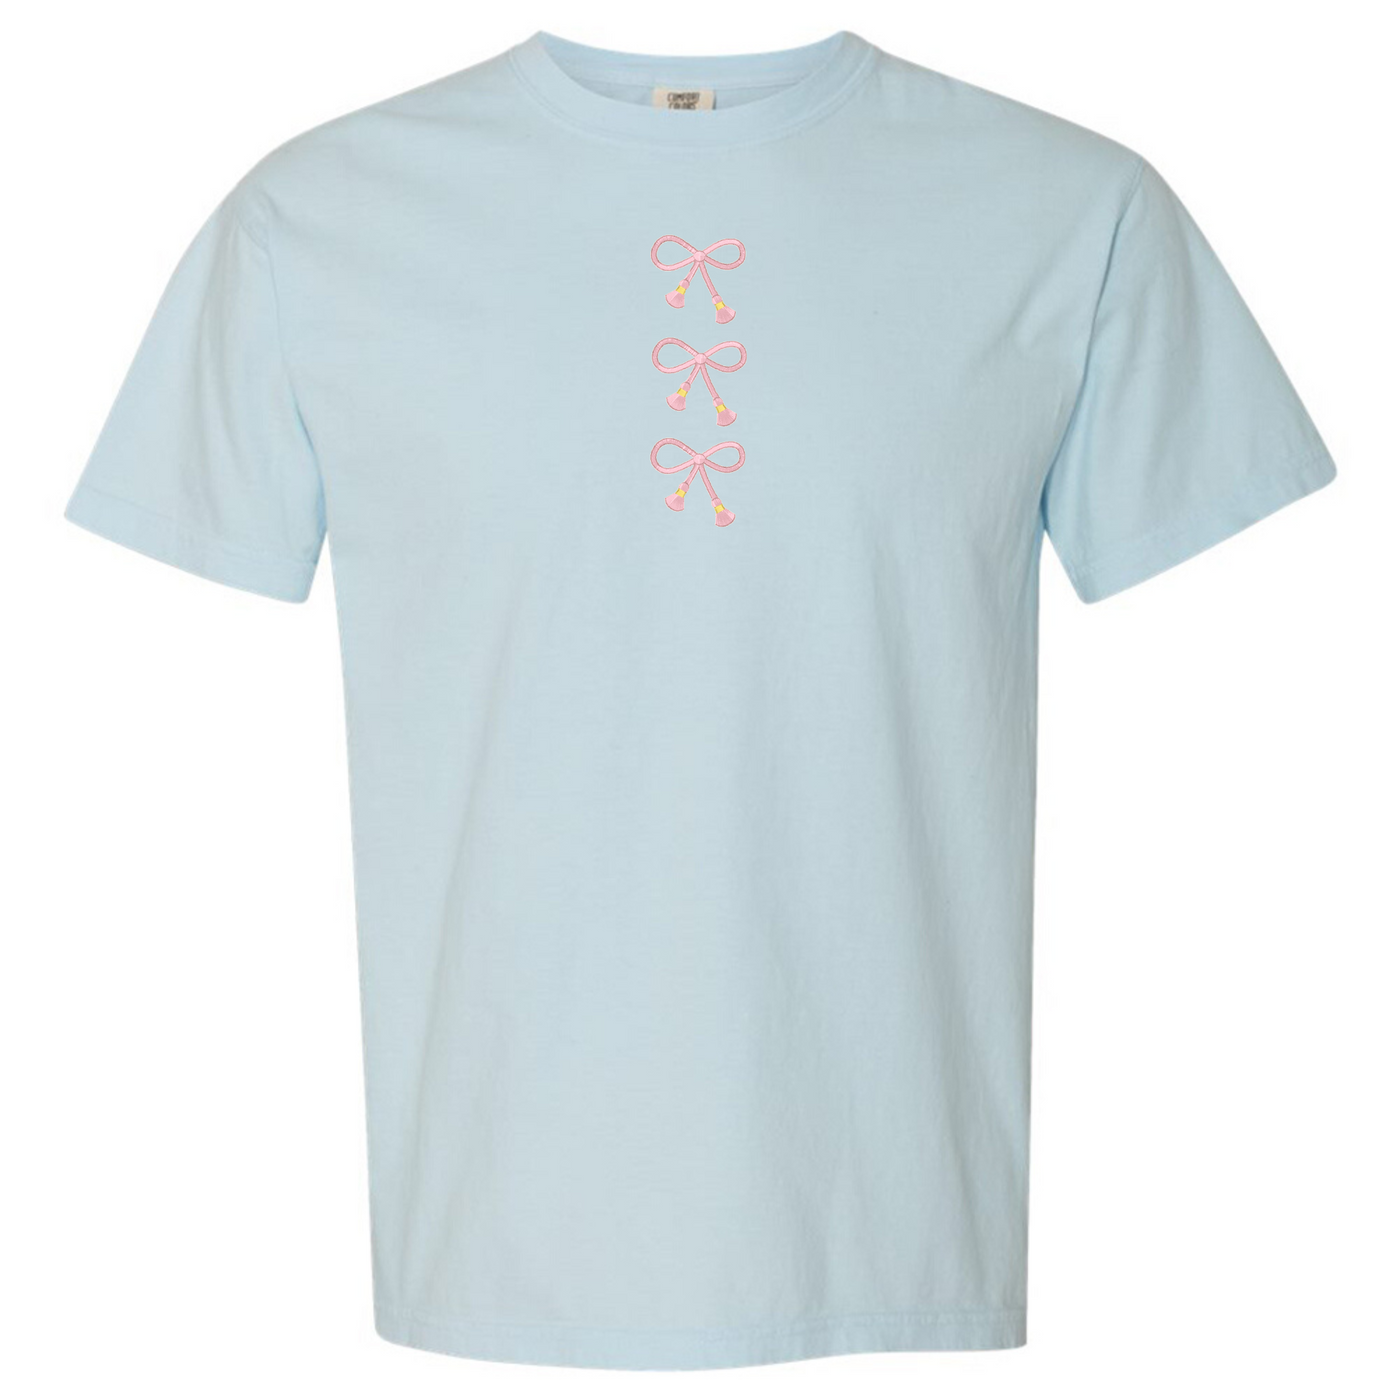 Embroidered Tasseled 'Bows' T-Shirt